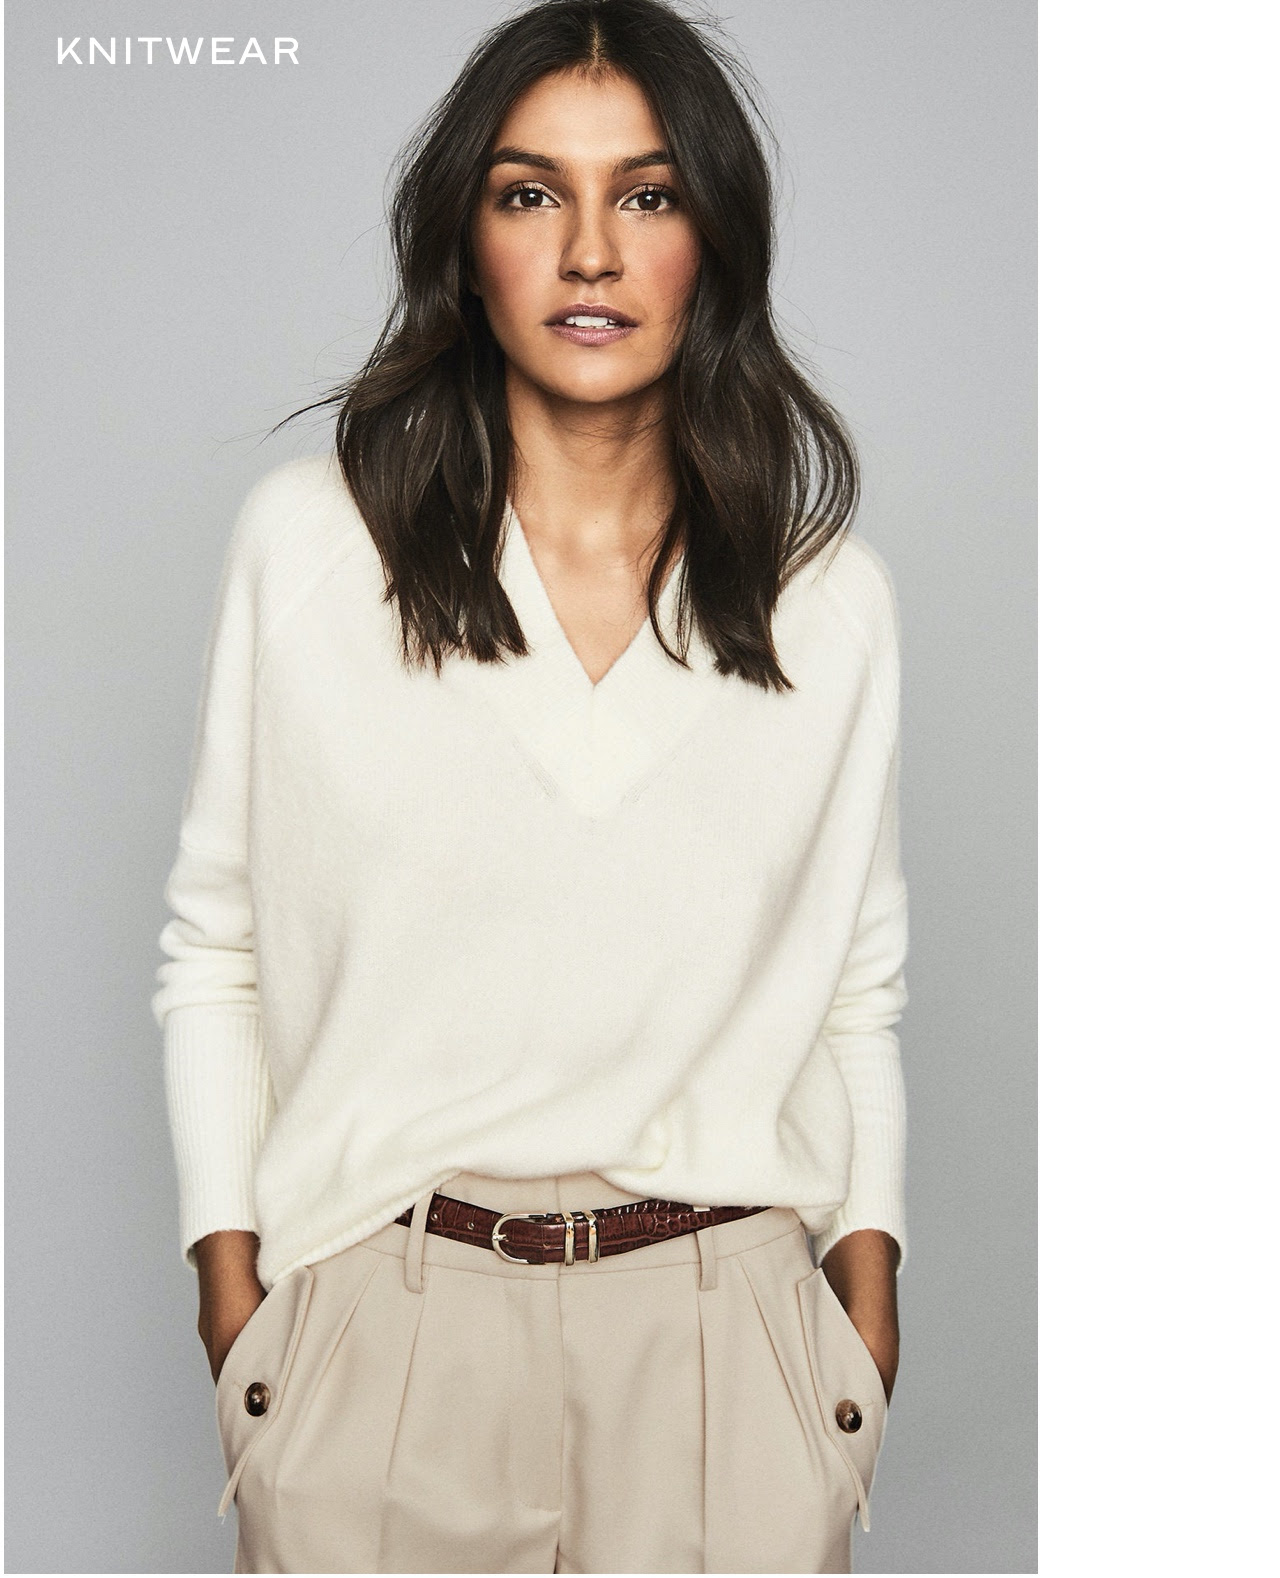 REISS - Sale - classic and contemporary pieces up To 50% Off